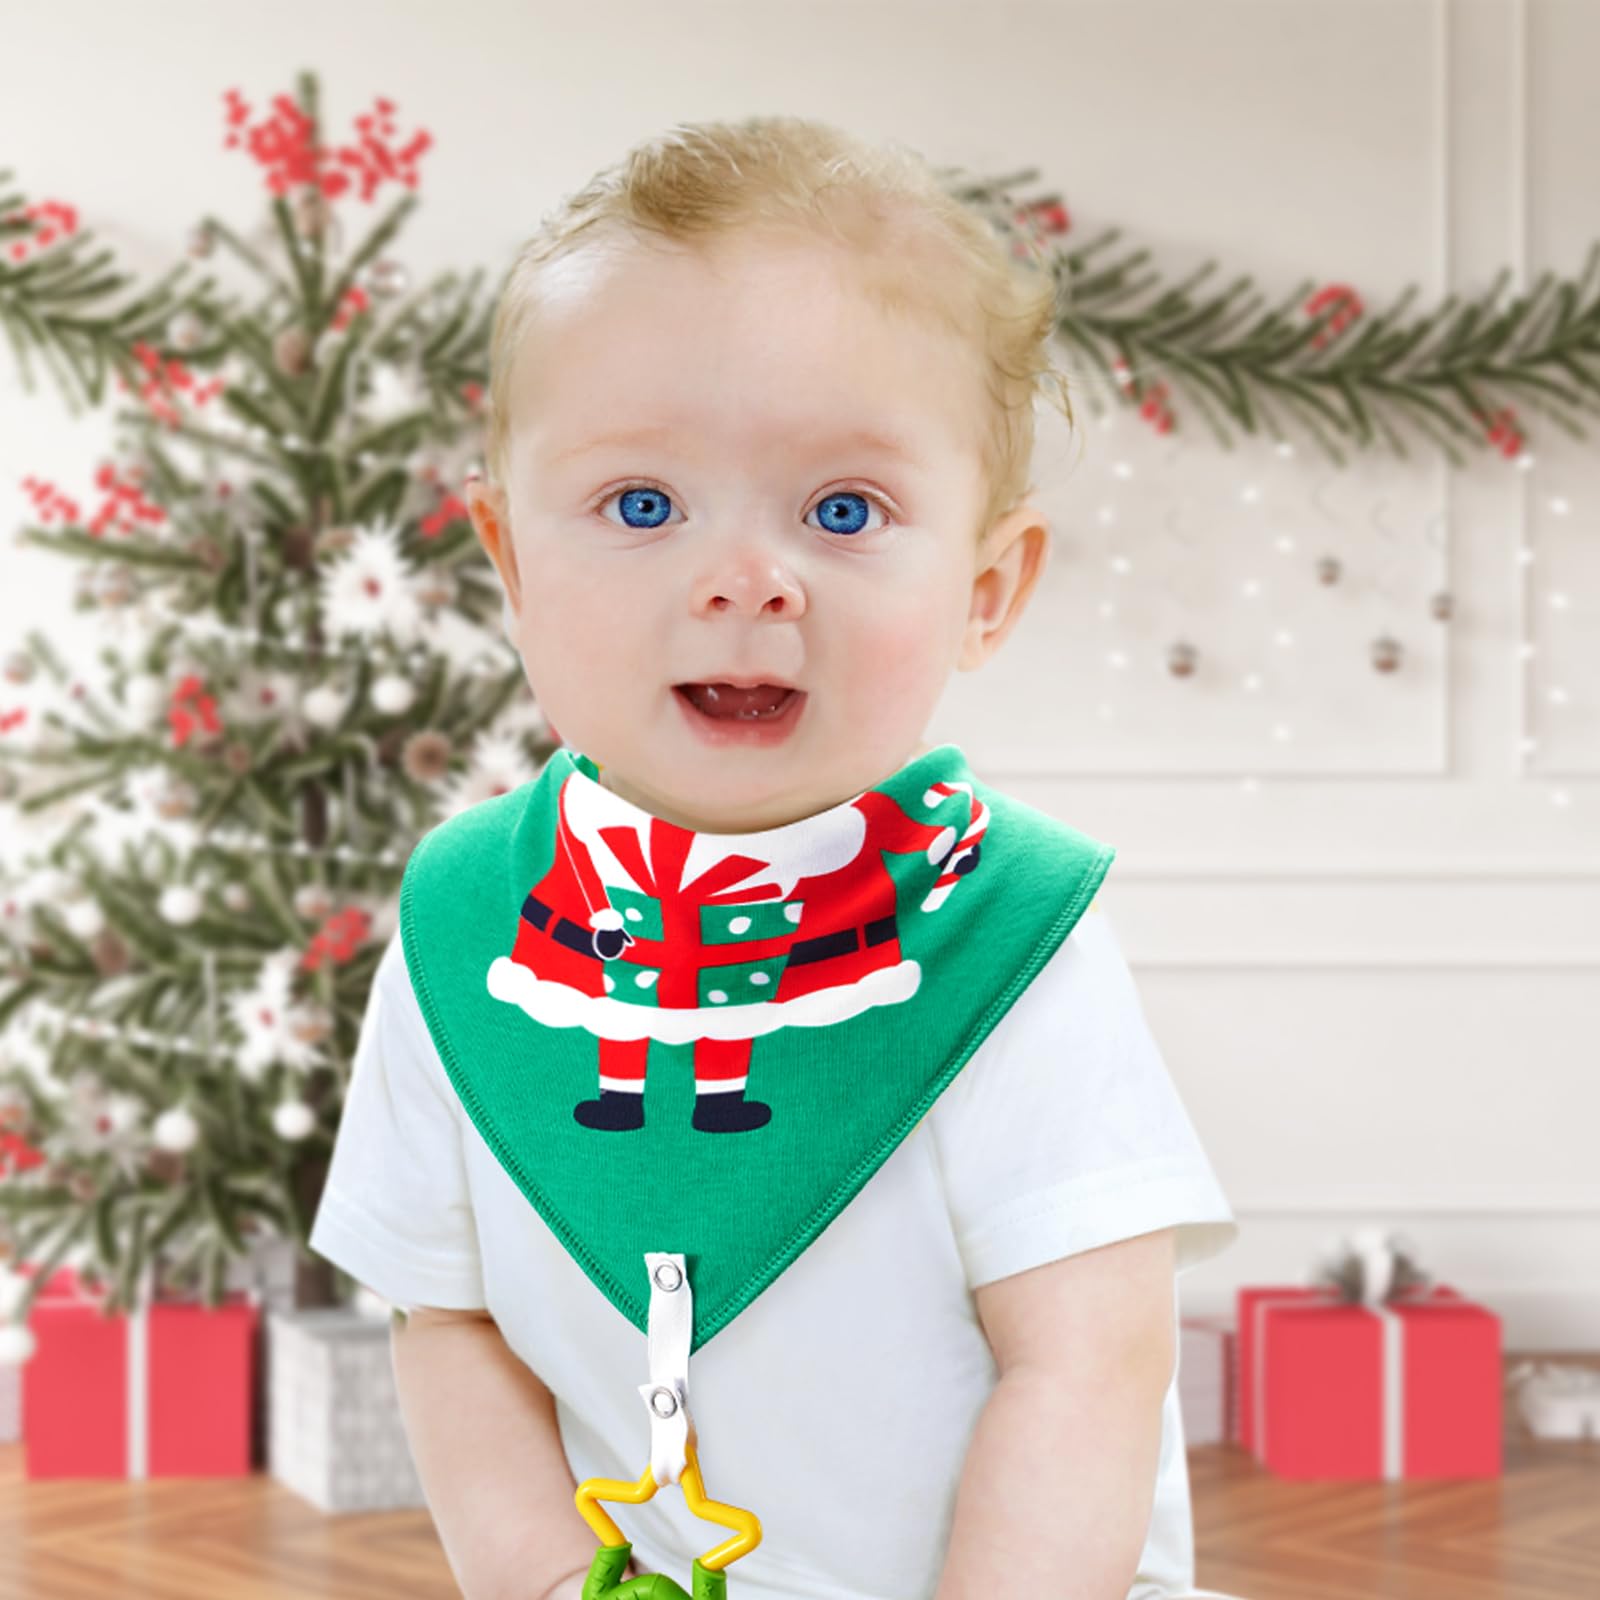 Baby Bandana Drool Bibs,Christmas Bibs for Boys and Girls by Super Absorbent Bandana Drool Bibs,Teething Toys Bibs Organic Cotton Baby Bibs for Infant Set of 4 with Two Teething Toys-Snowman,Santa